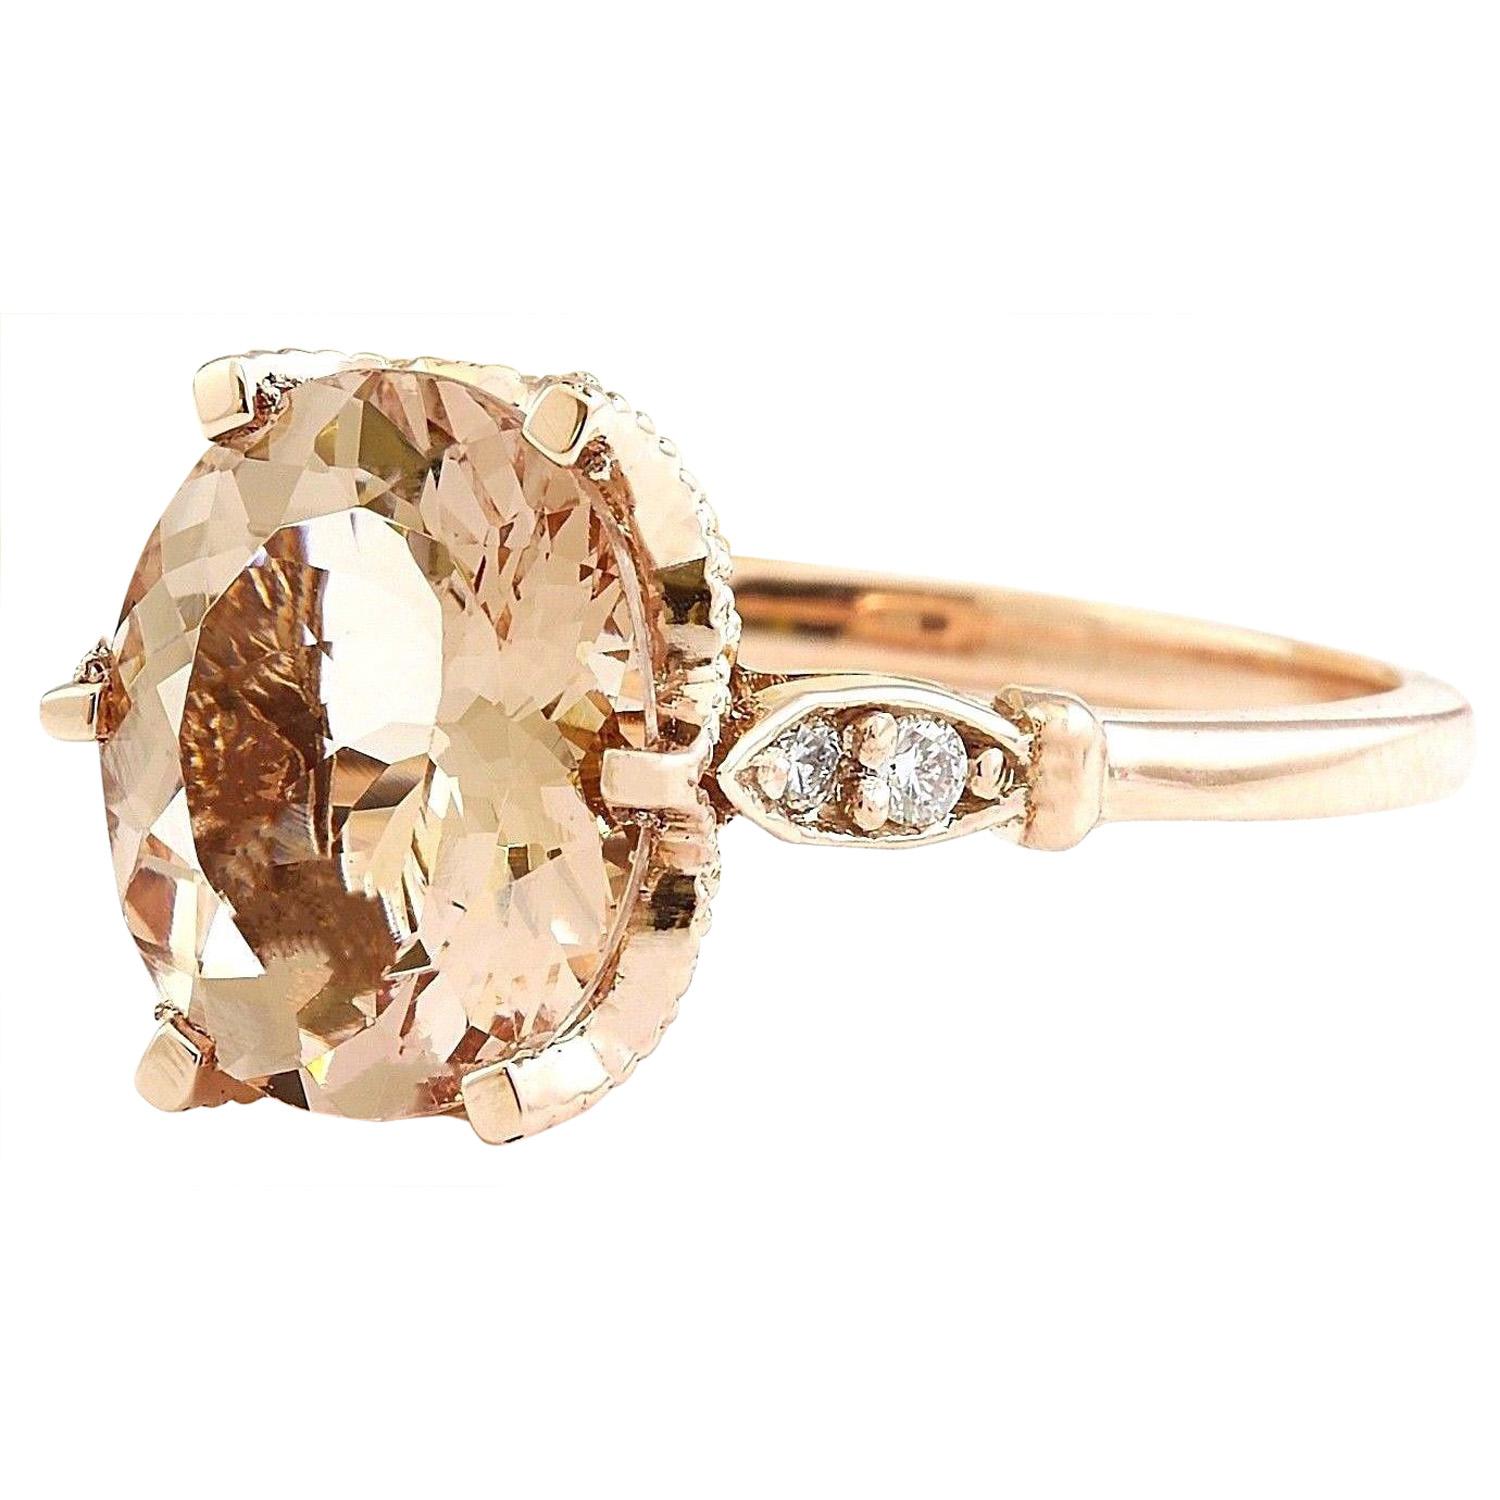 Introducing our stunning 2.15 Carat Natural Morganite Ring, crafted in 14K Solid Rose Gold. This captivating cocktail ring features a lustrous oval-cut morganite gemstone weighing 2.00 carats, with dimensions of 11.00x9.00 millimeters, radiating a